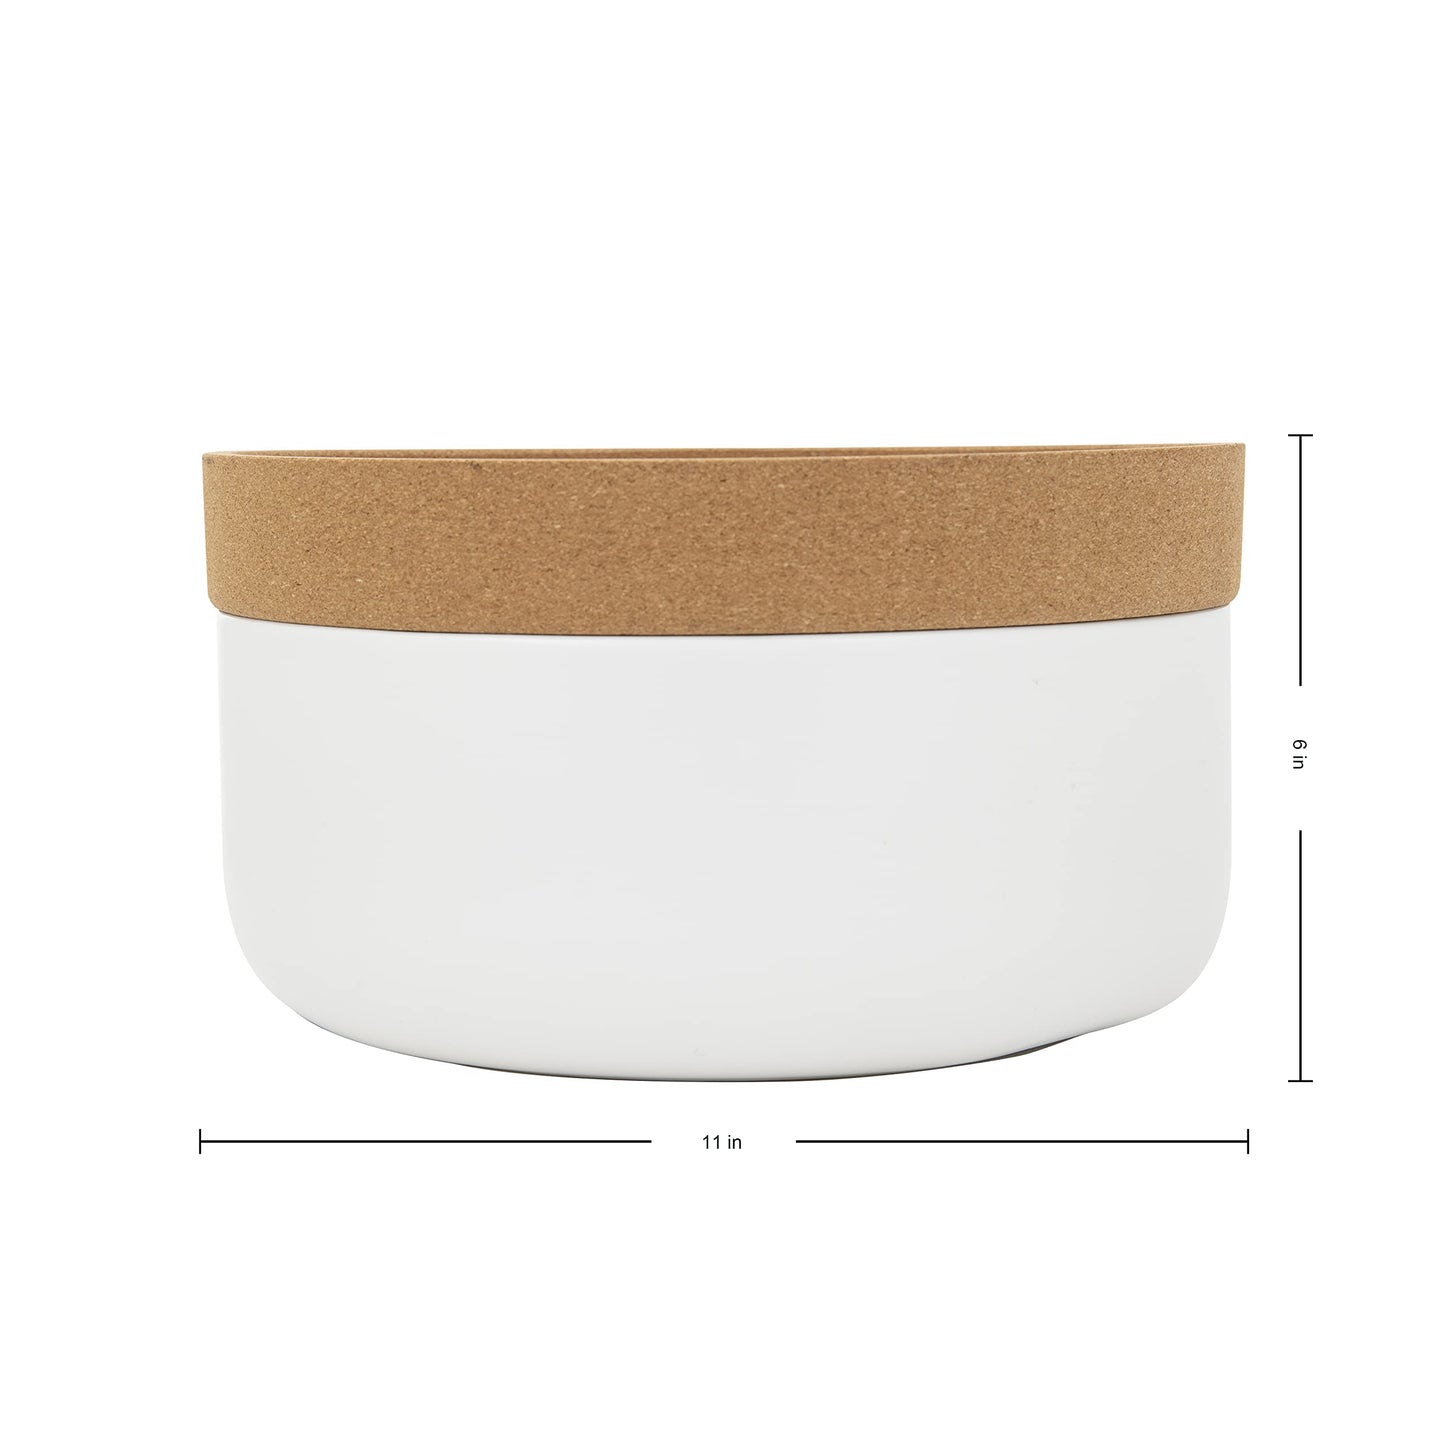 Kamenstein 2 Compartment Large Bowl Extends Produce Freshness, 11 x 11 x 6 Inch, Natural Cork and White Ceramic